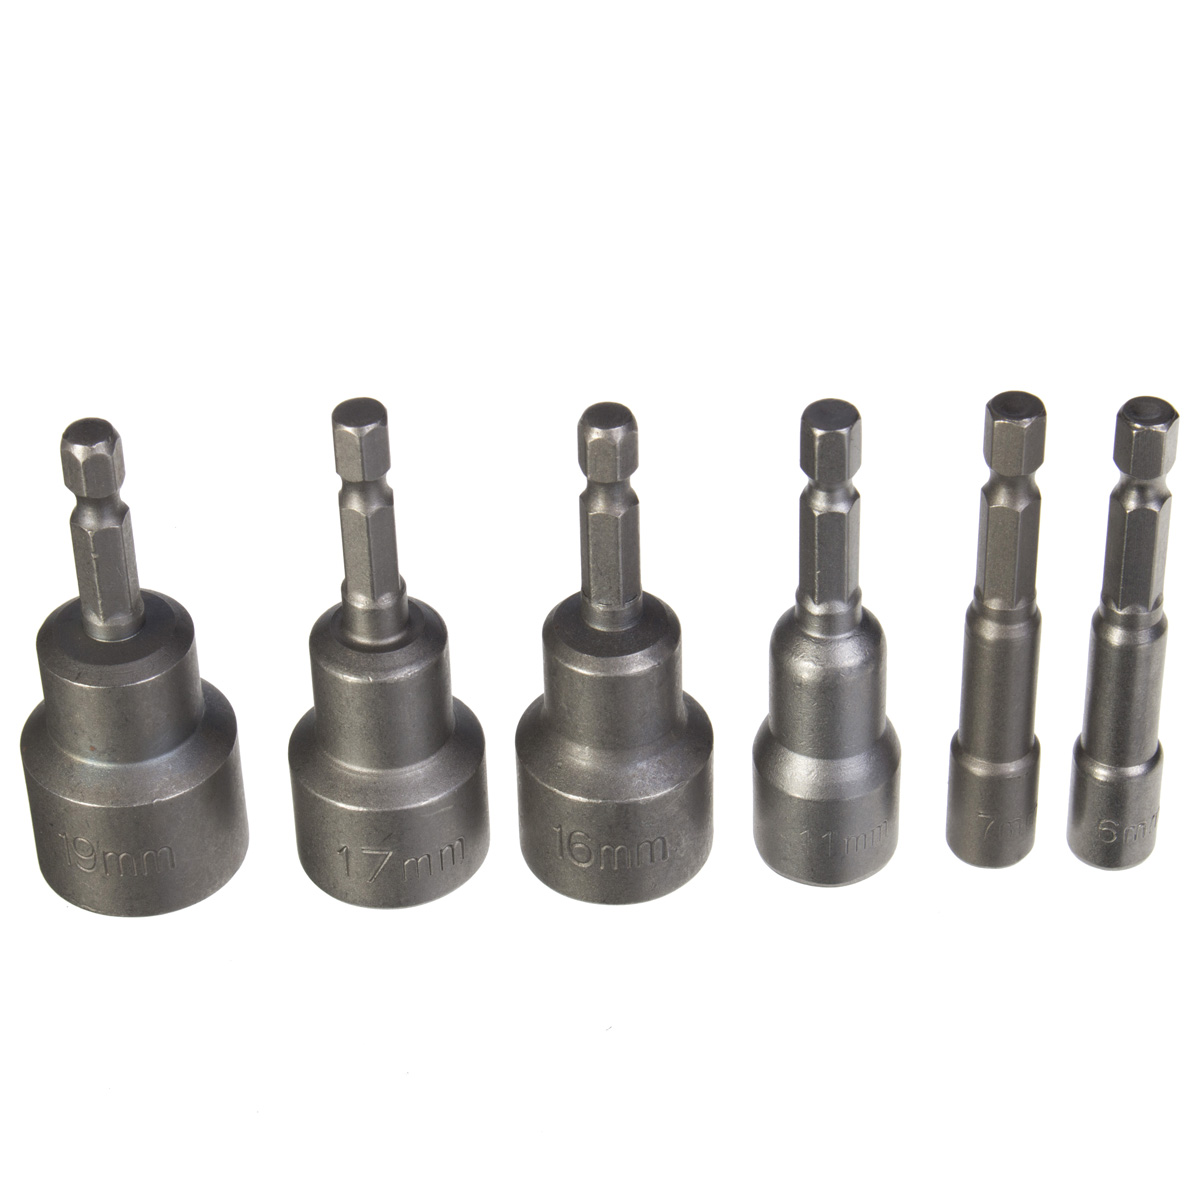 65mm-14-Inch-Hex-Socket-Magnetic-Nut-Driver-Setter-6mm-19mm-Drill-Bit-Adapter-996527-8